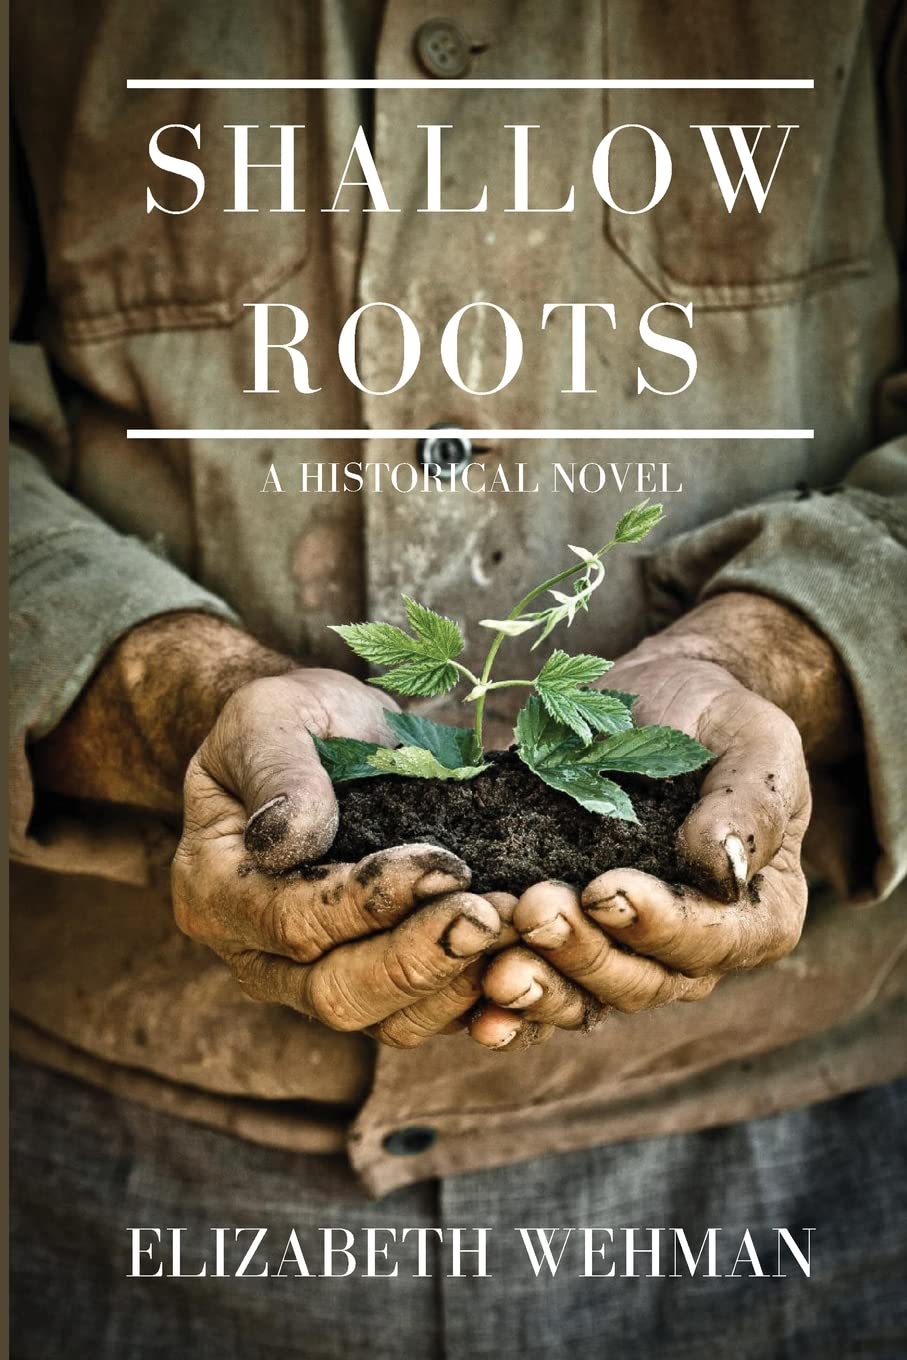 Cover Image for "Shallow Roots"